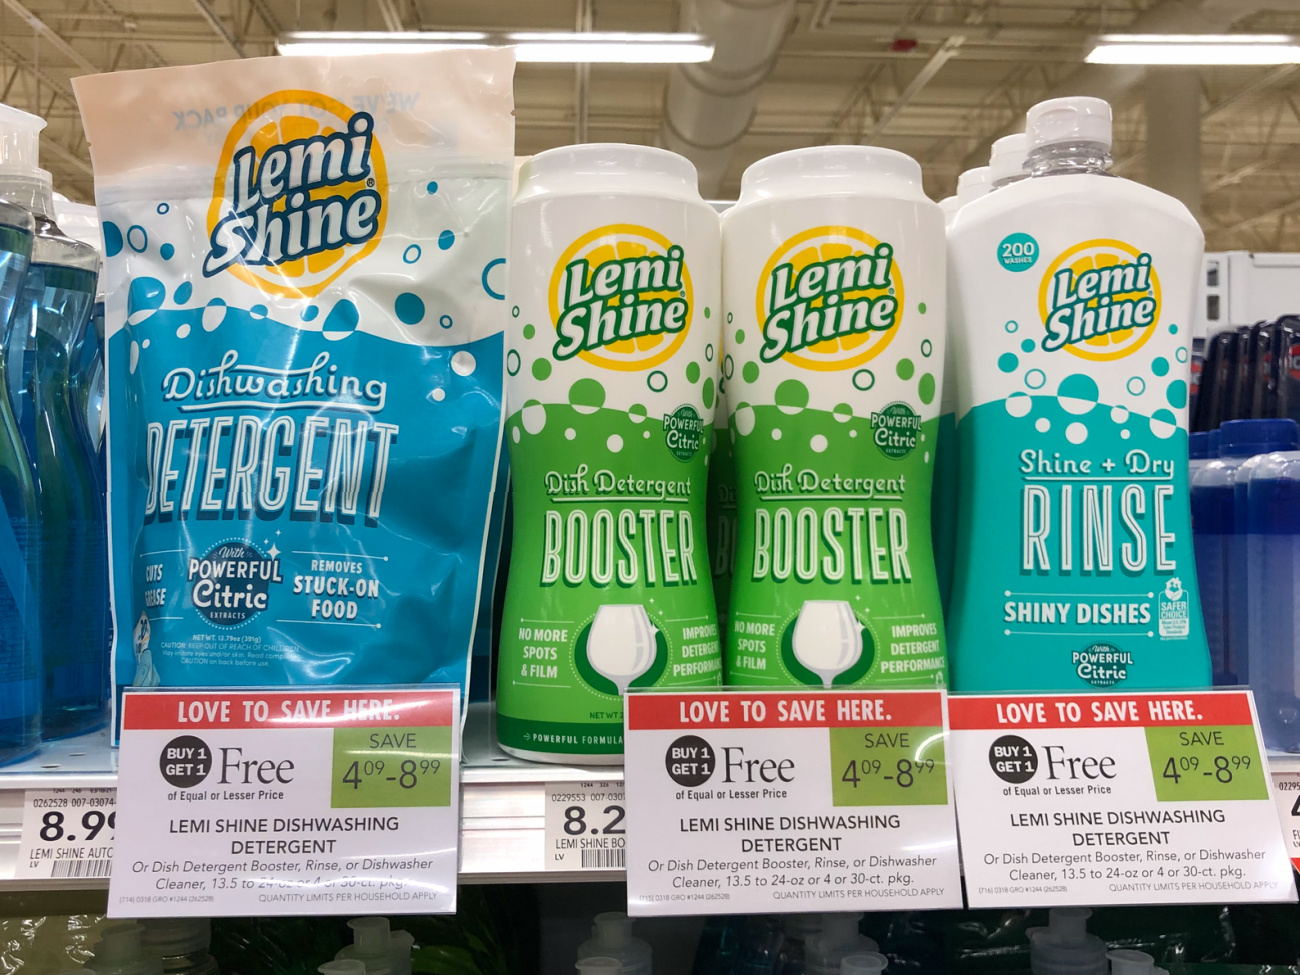 Your Favorite Lemi Shine Products Are BOGO At Publix - Get Great Deals On All Natural Products That Work Great! on I Heart Publix